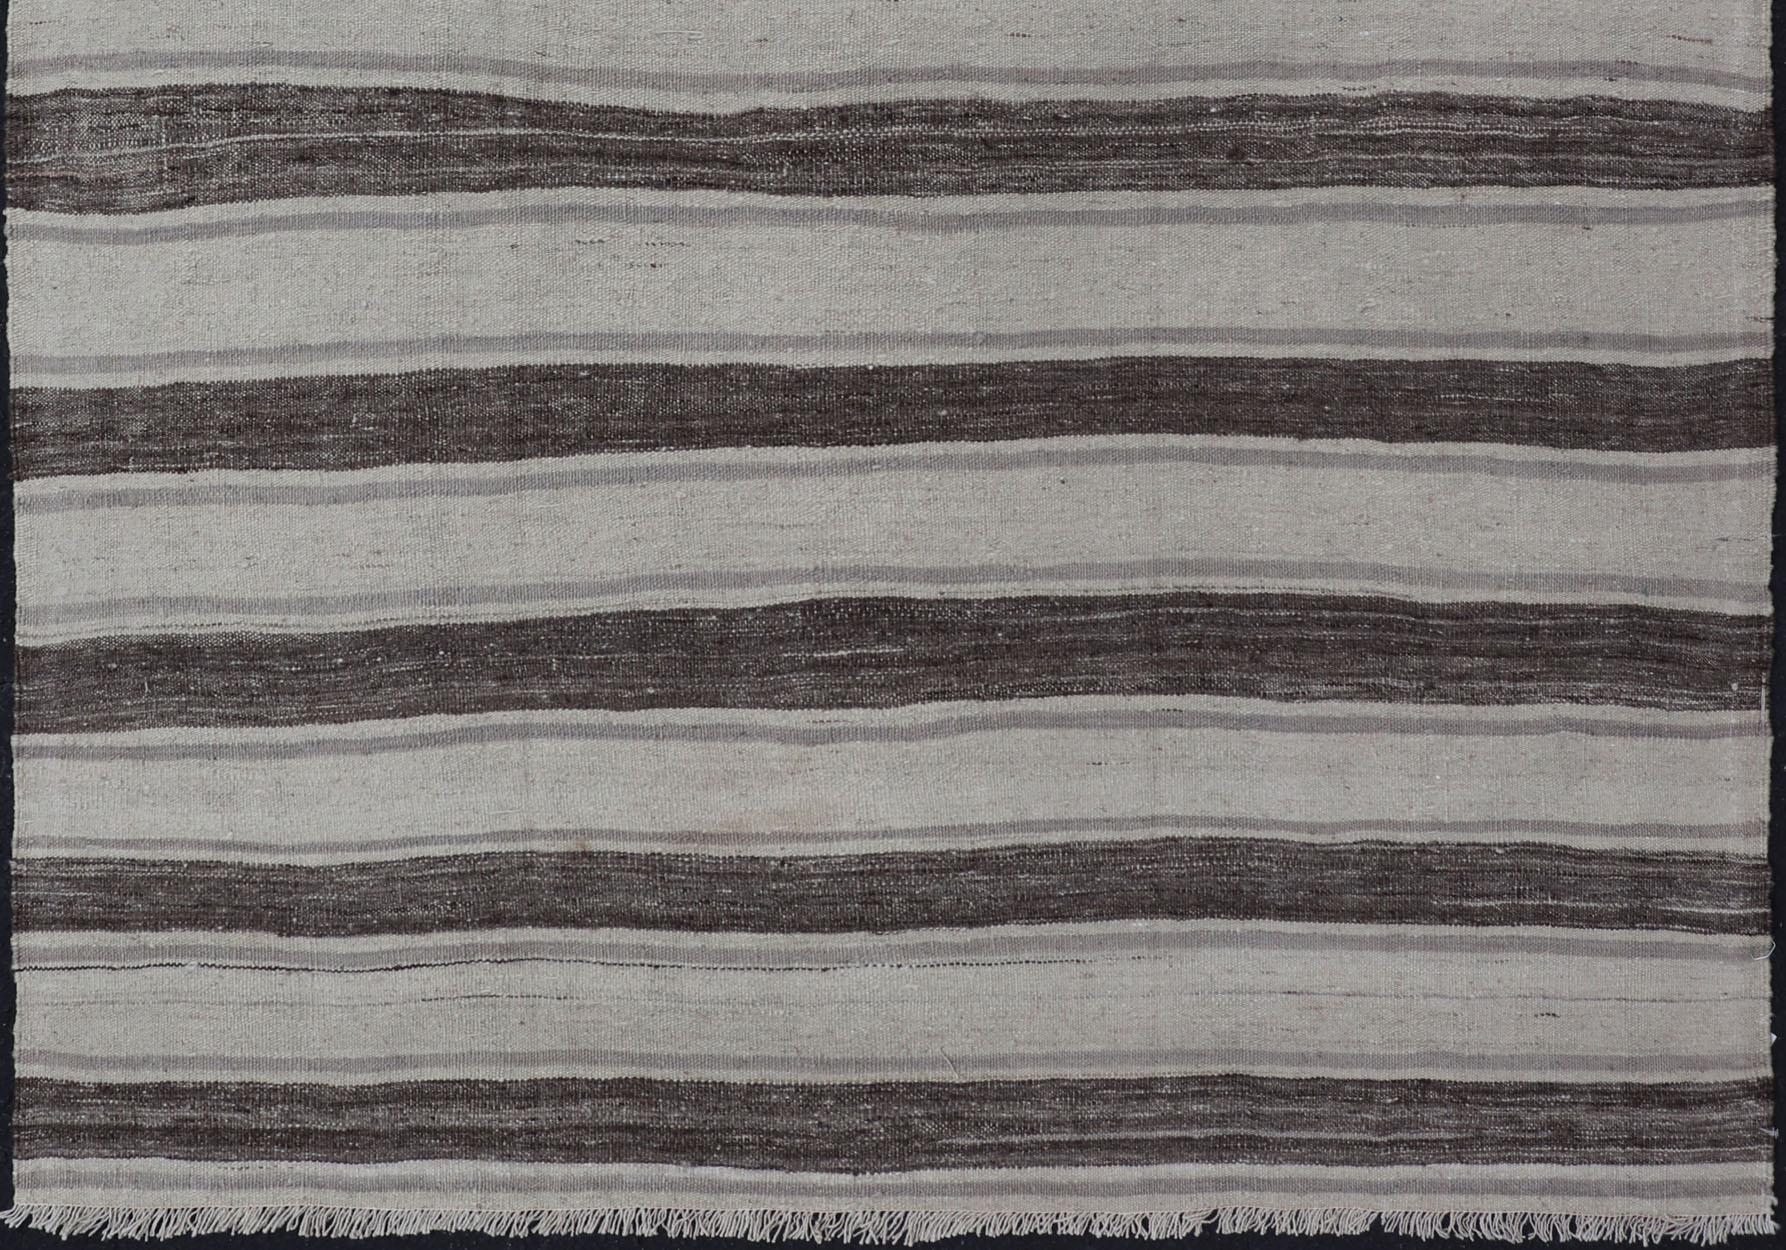 Vintage Flat Weave Turkish Kilim with stripes in ivory, grey, and charcoal. Keivan Woven Arts / rug EN-P13424, country of origin / type: Turkey / Kilim, circa Mid-20th Century.

This vintage flat-woven Kilim features a Minimalist design rendered in